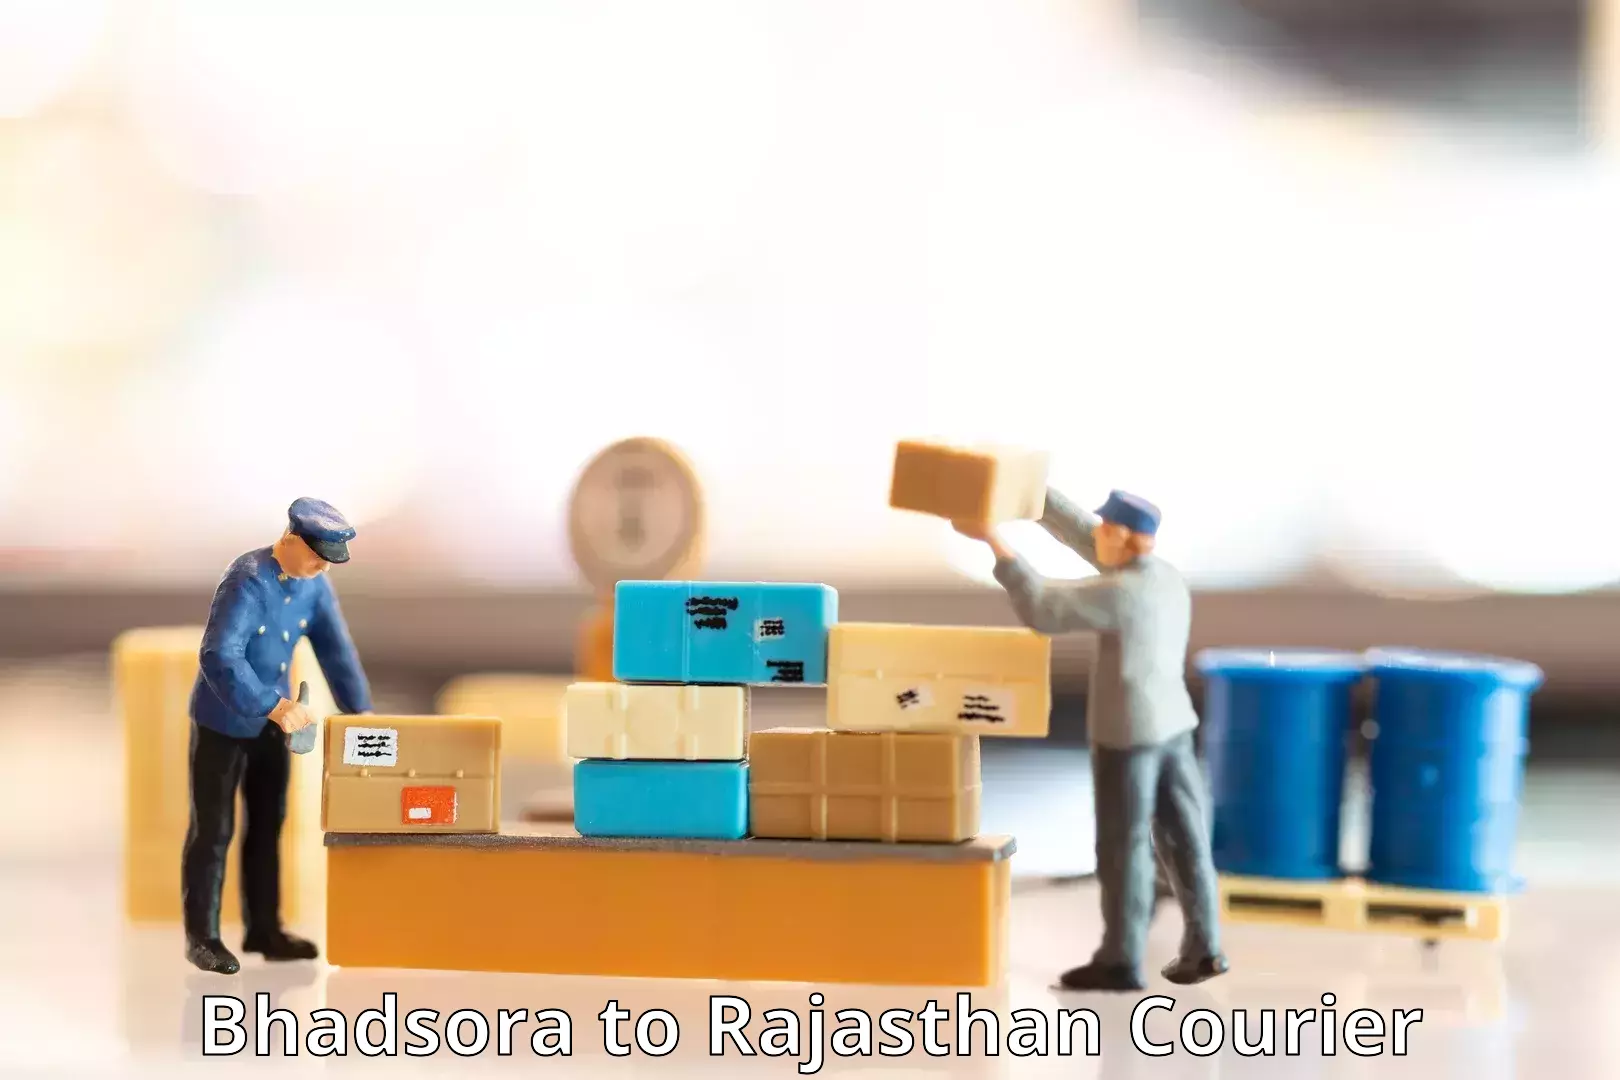 Lightweight parcel options Bhadsora to Rajasthan